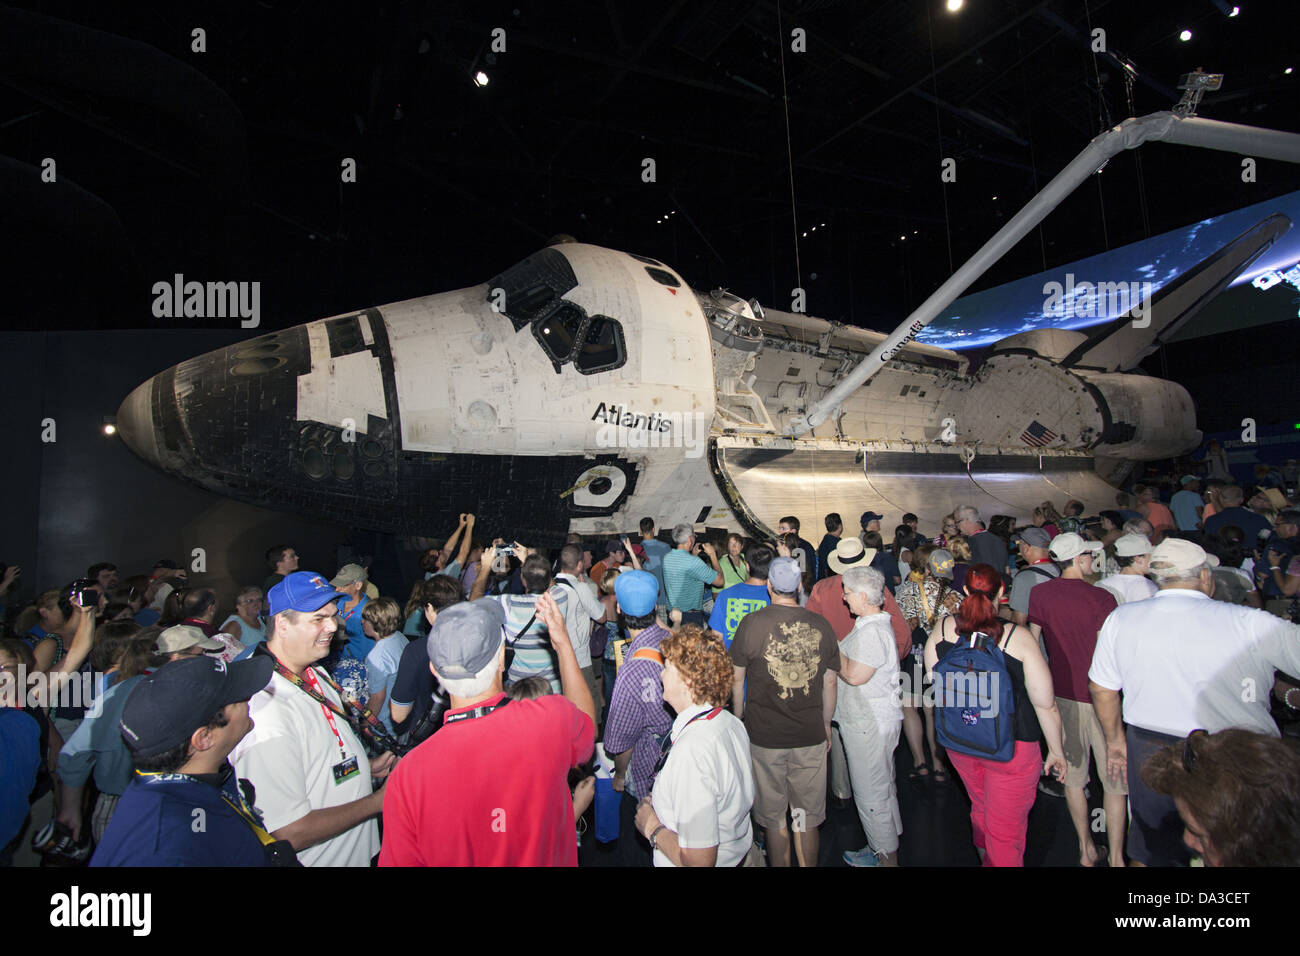 Visitors gather around the new Space Shuttle Atlantis facility at the Kennedy Space Center Visitor Complex June 29, 2013 in Cape Canaveral, Florida. The new $100 million facility includes interactive exhibits that tell the story of the 30-year Space Shuttle Program and highlight the future of space exploration. Stock Photo